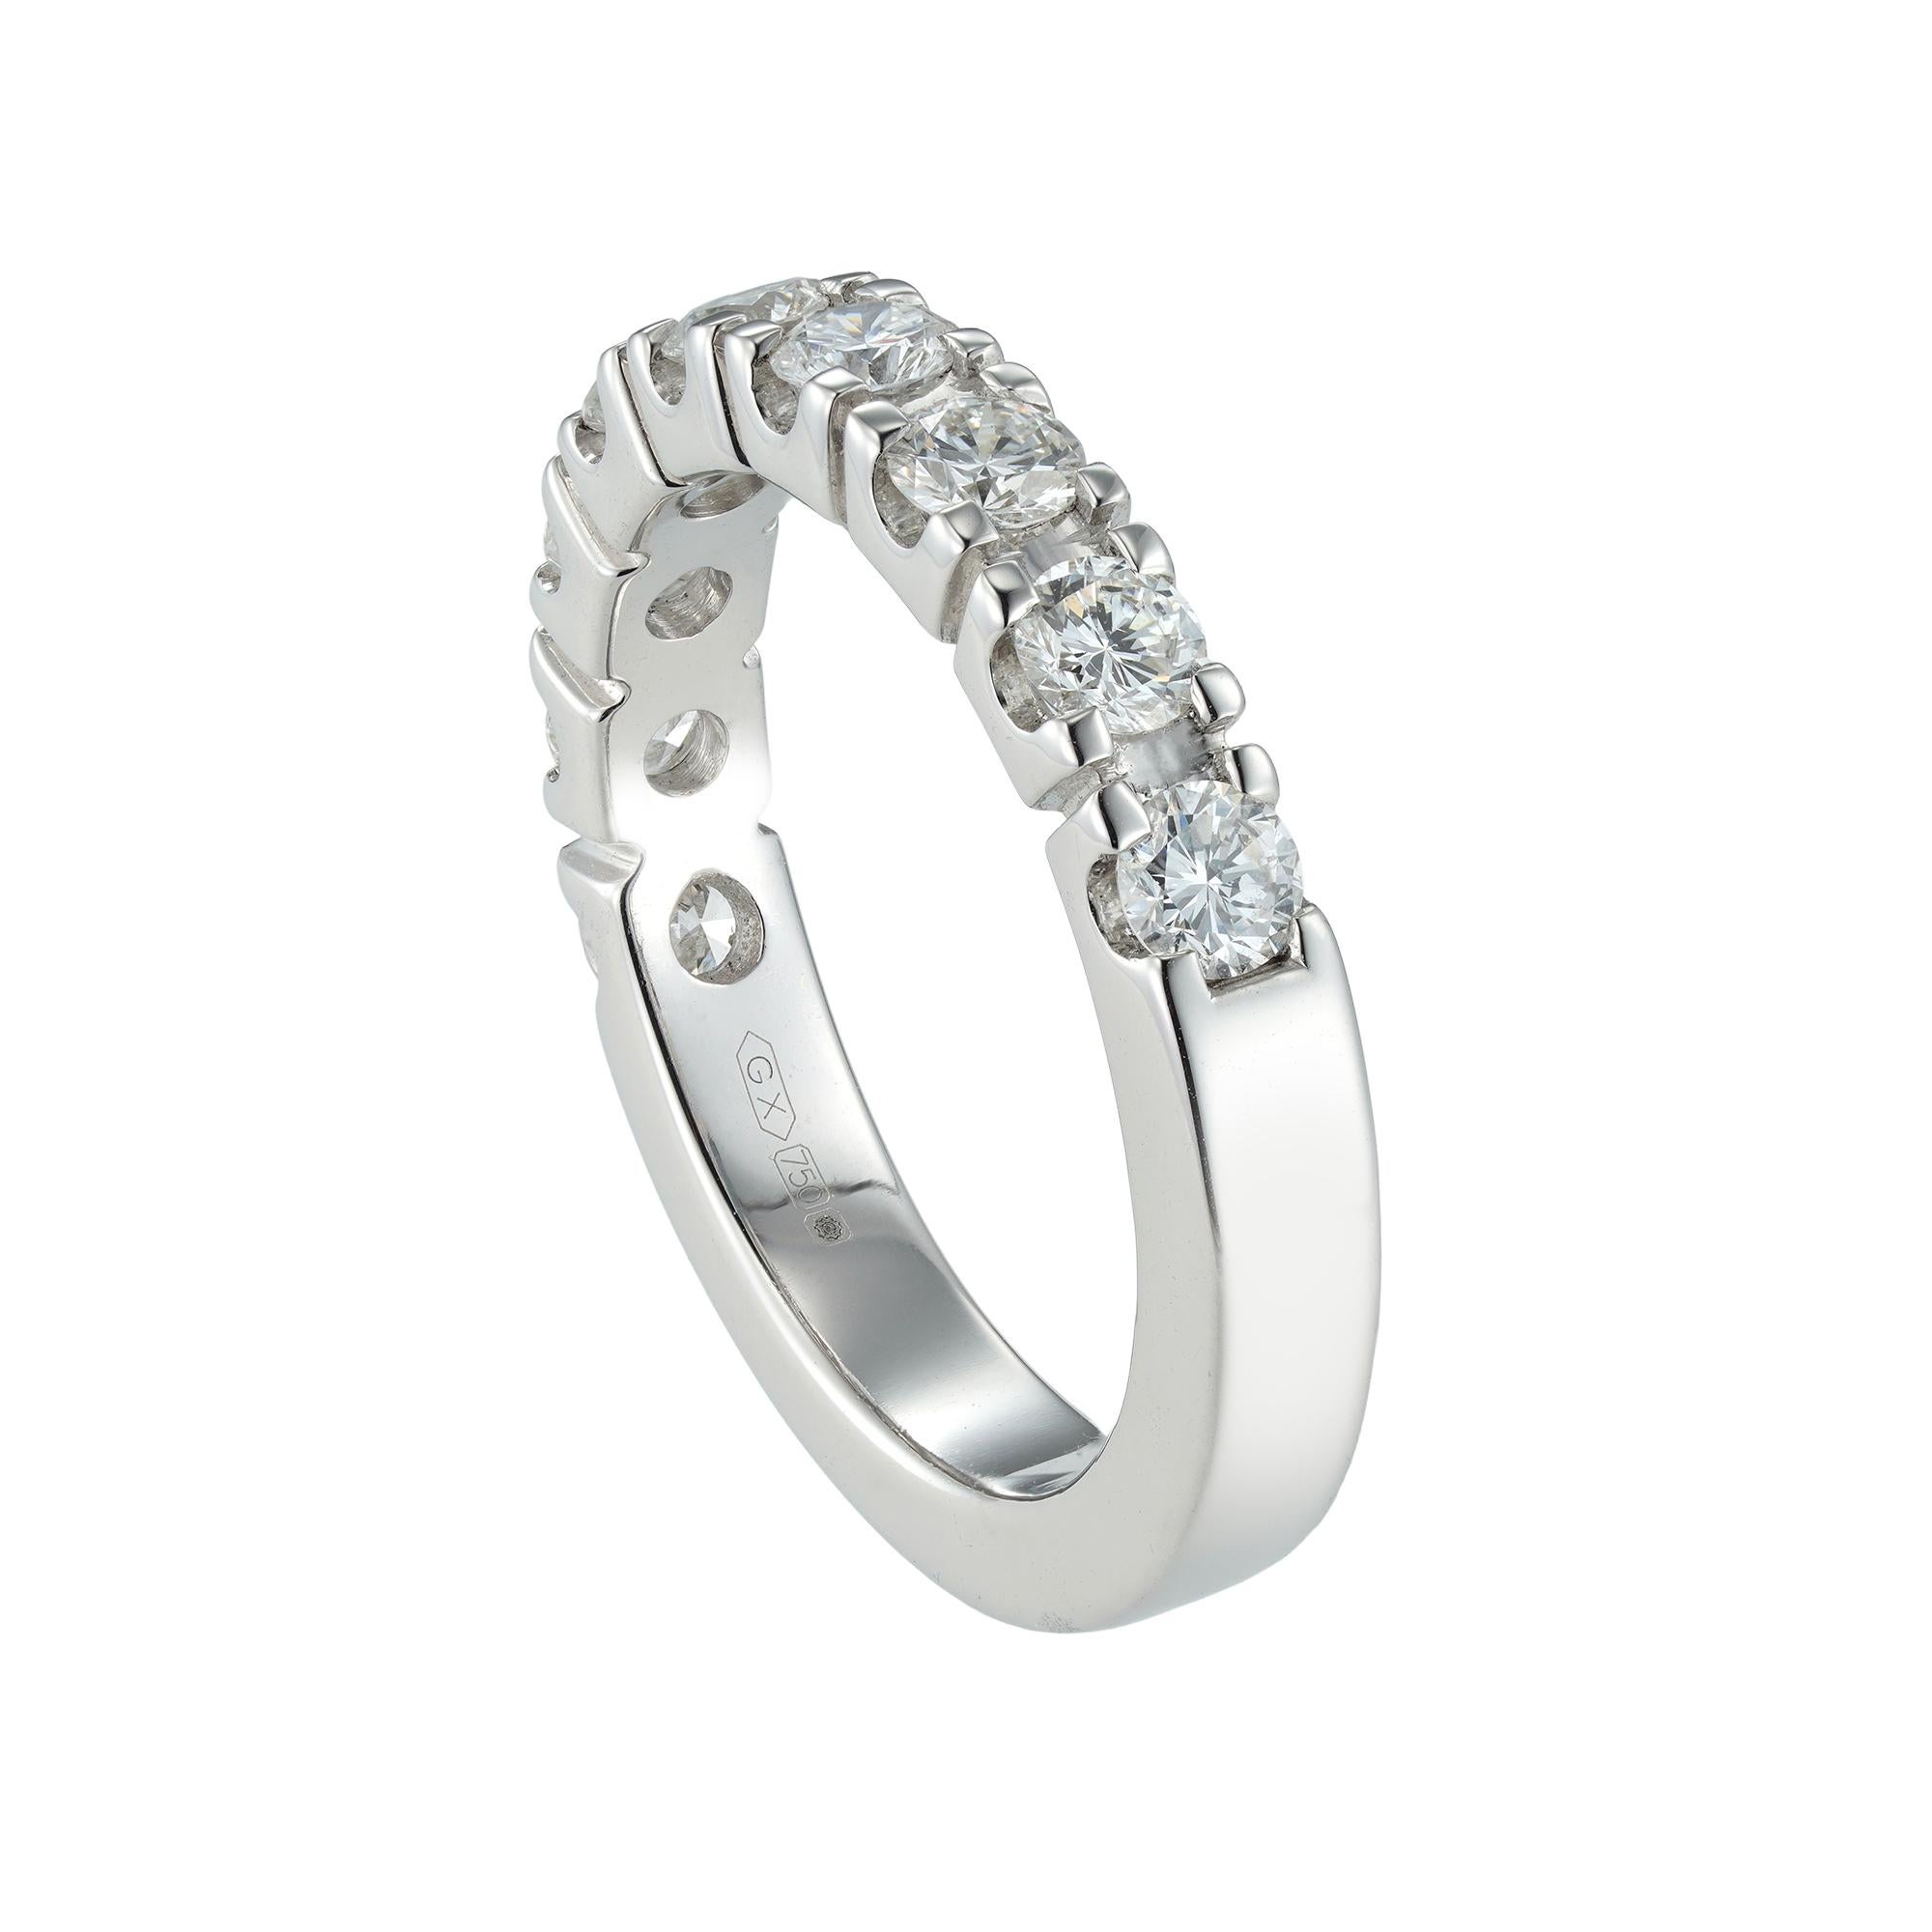 A diamond half eternity ring, the nine round brilliant-cut diamonds weighing 1.00 carat in total, all in a castle-set 18ct white gold mount, finger size M 1/2, gross weight 6.1 grams.

A sparkling diamond half eternity ring. This ring features a row